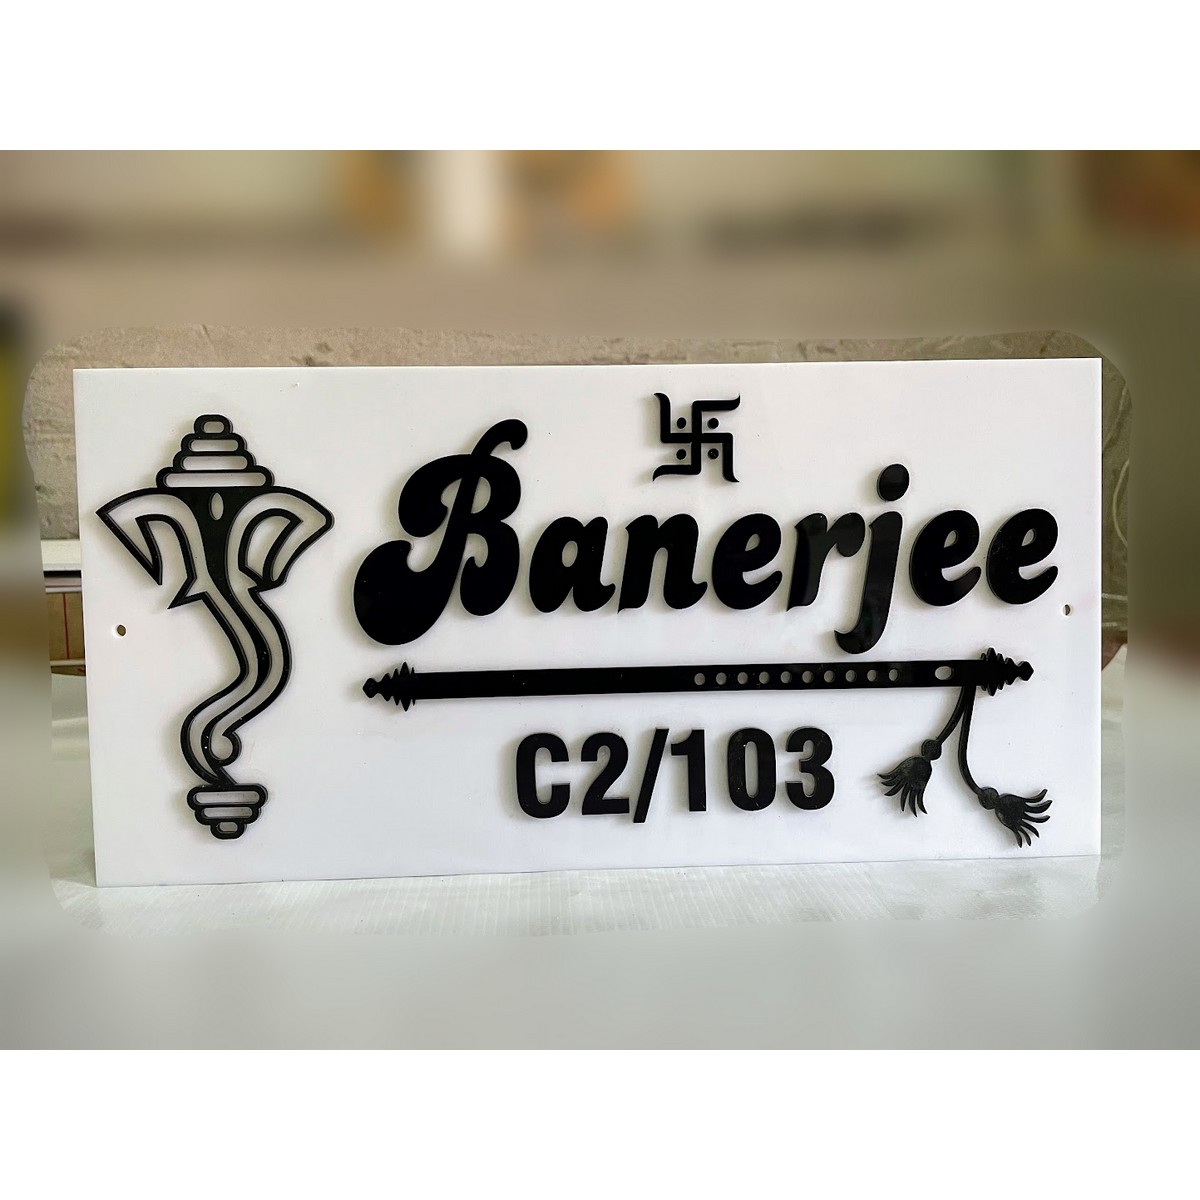 Banerjee Acrylic Home Name Plate - Personalized & Elegant Home Decor by My Interior Factory